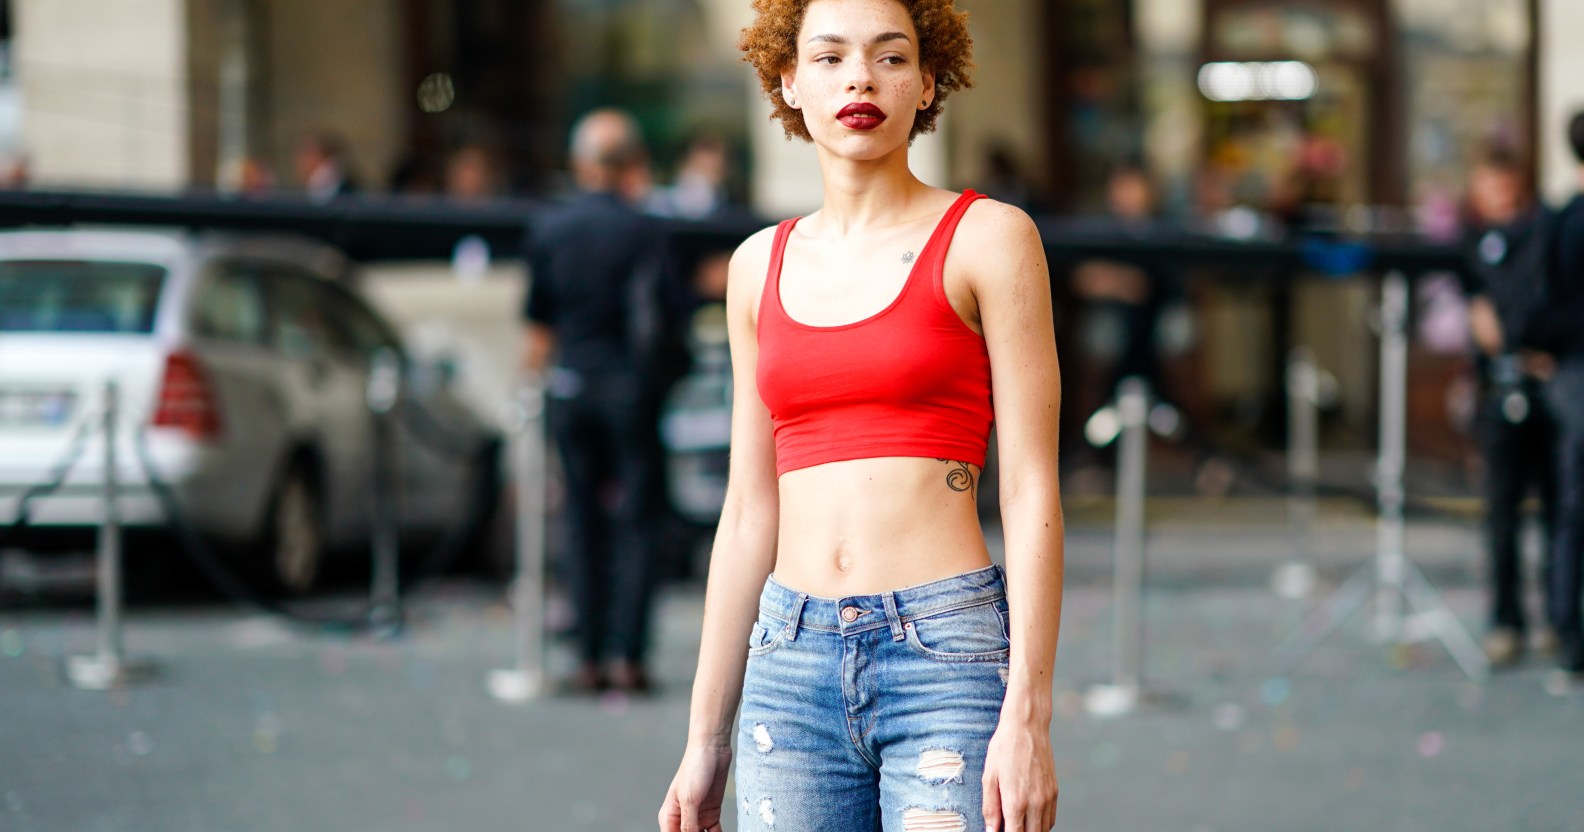 Carissa Pinkston wearing a red bra top and jeans